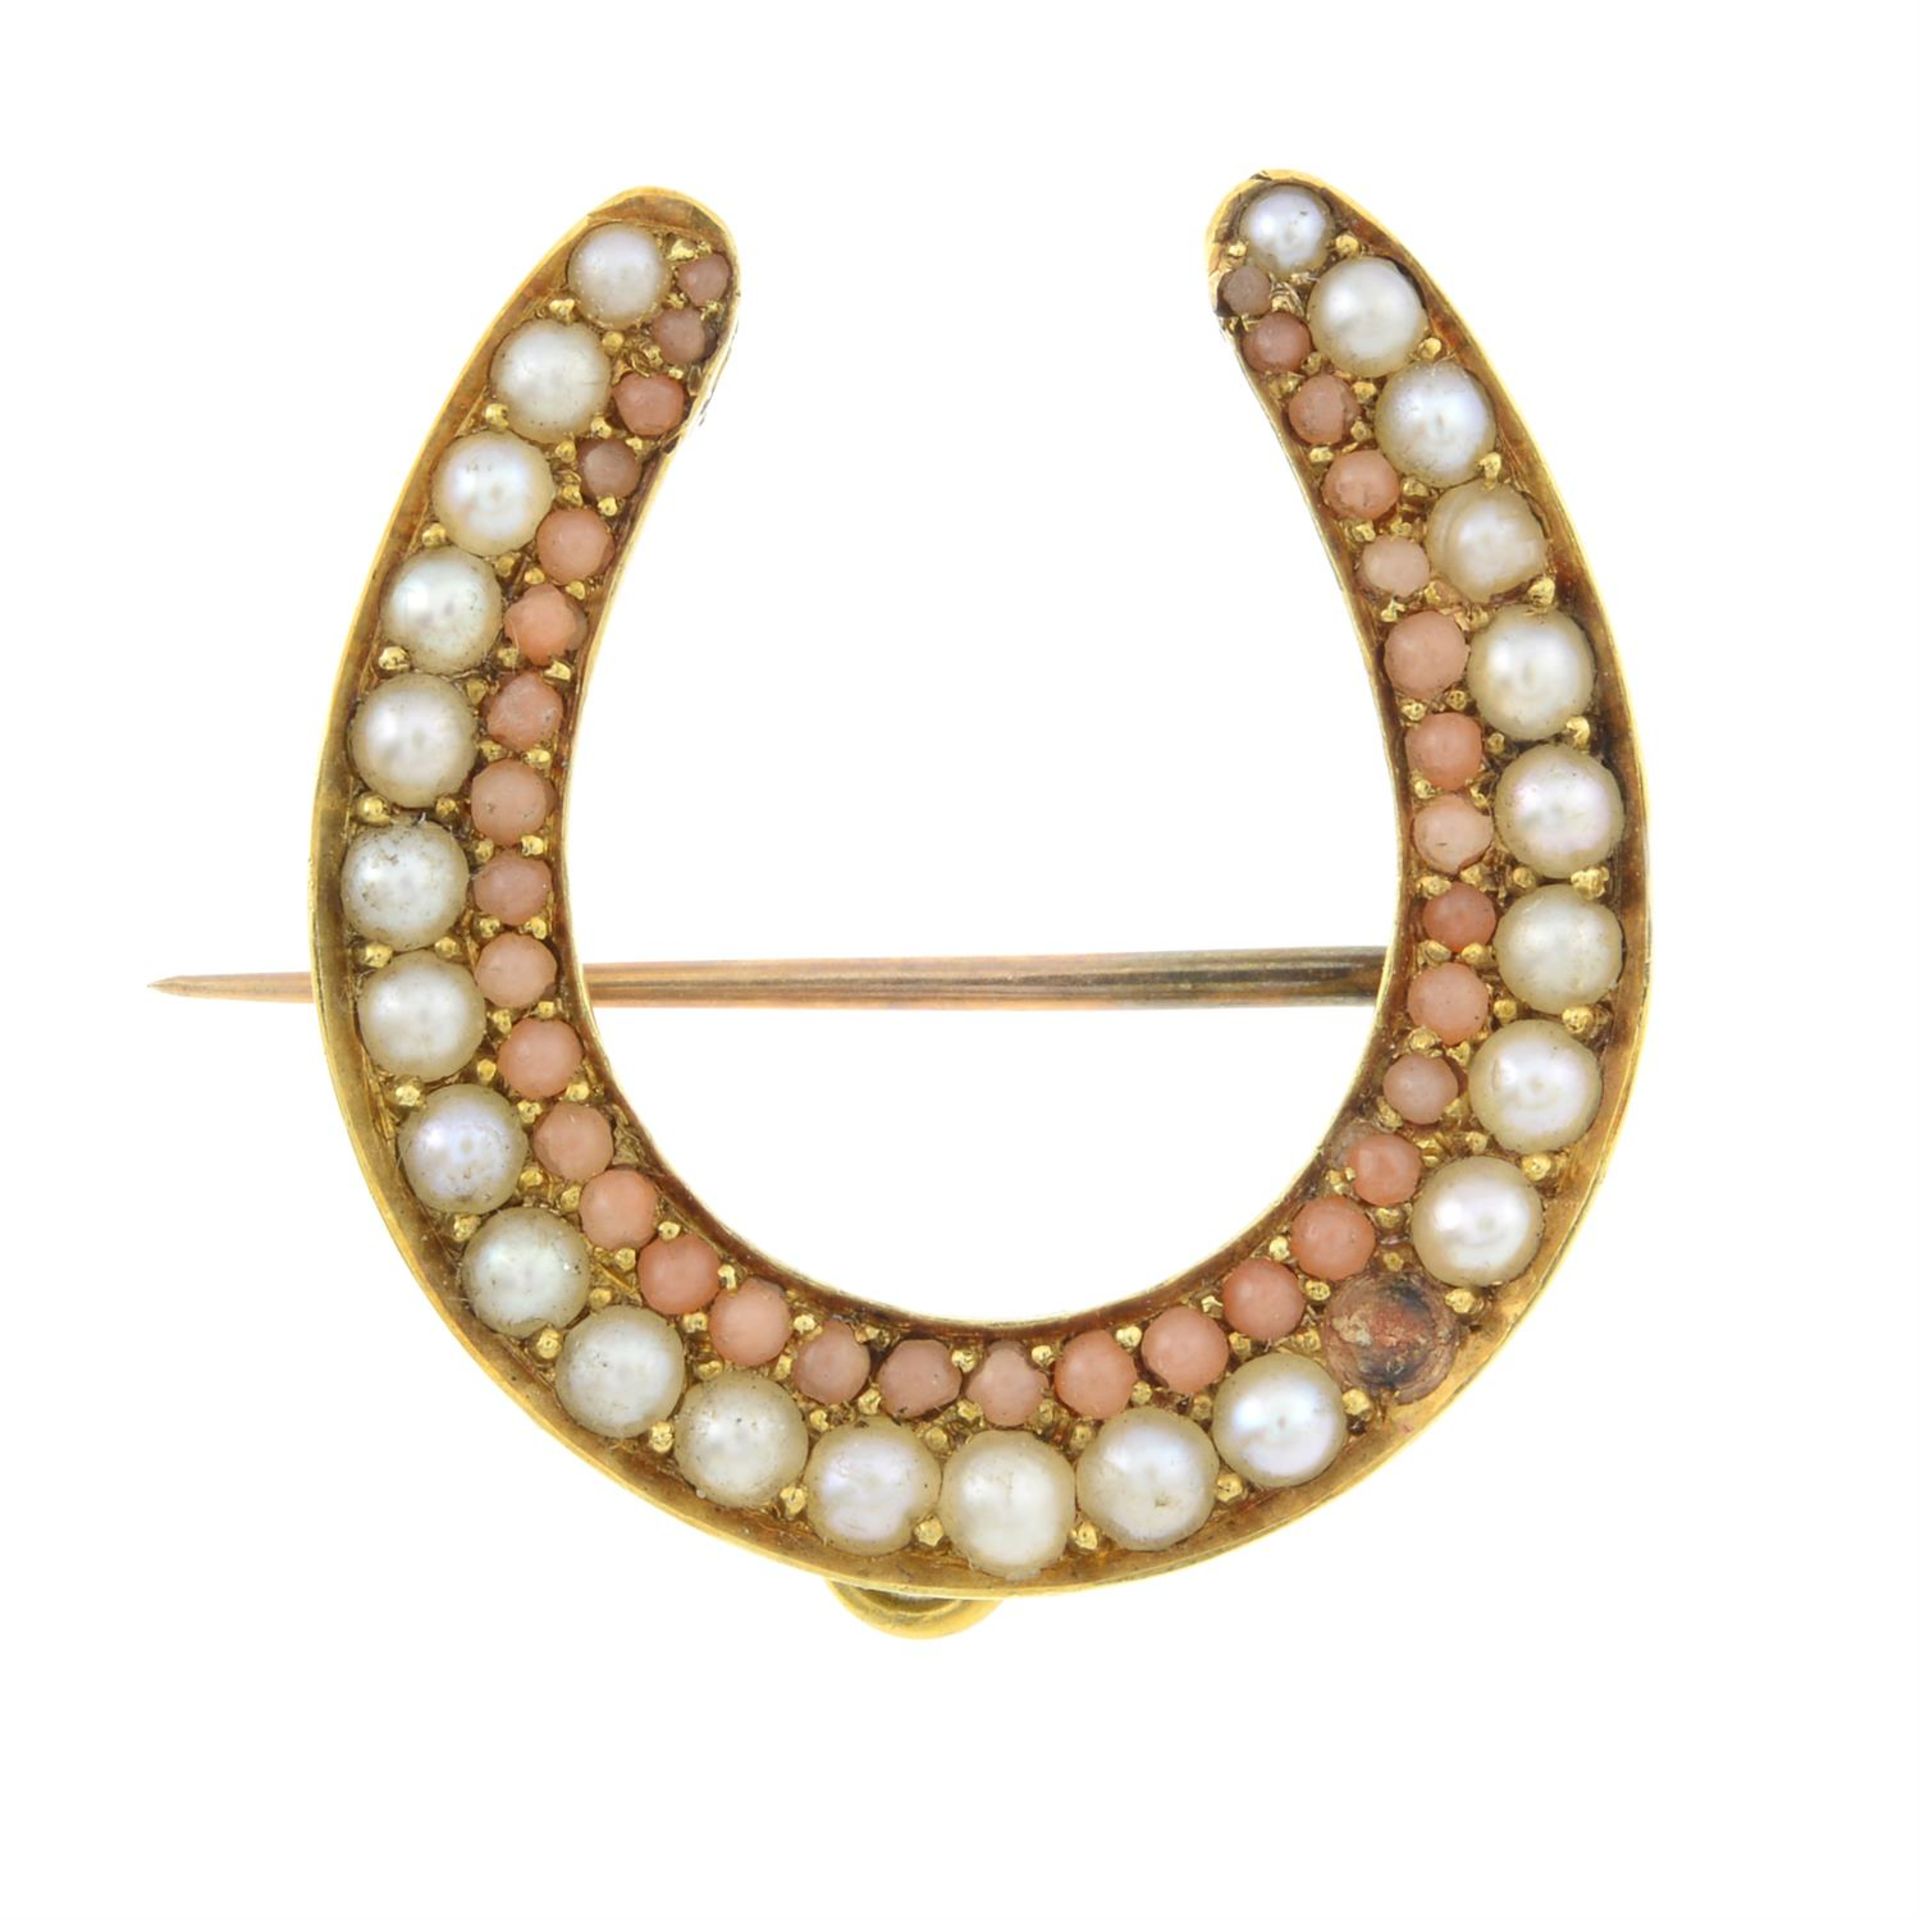 A late 19th century gold split pearl and coral horseshoe brooch/pendant.